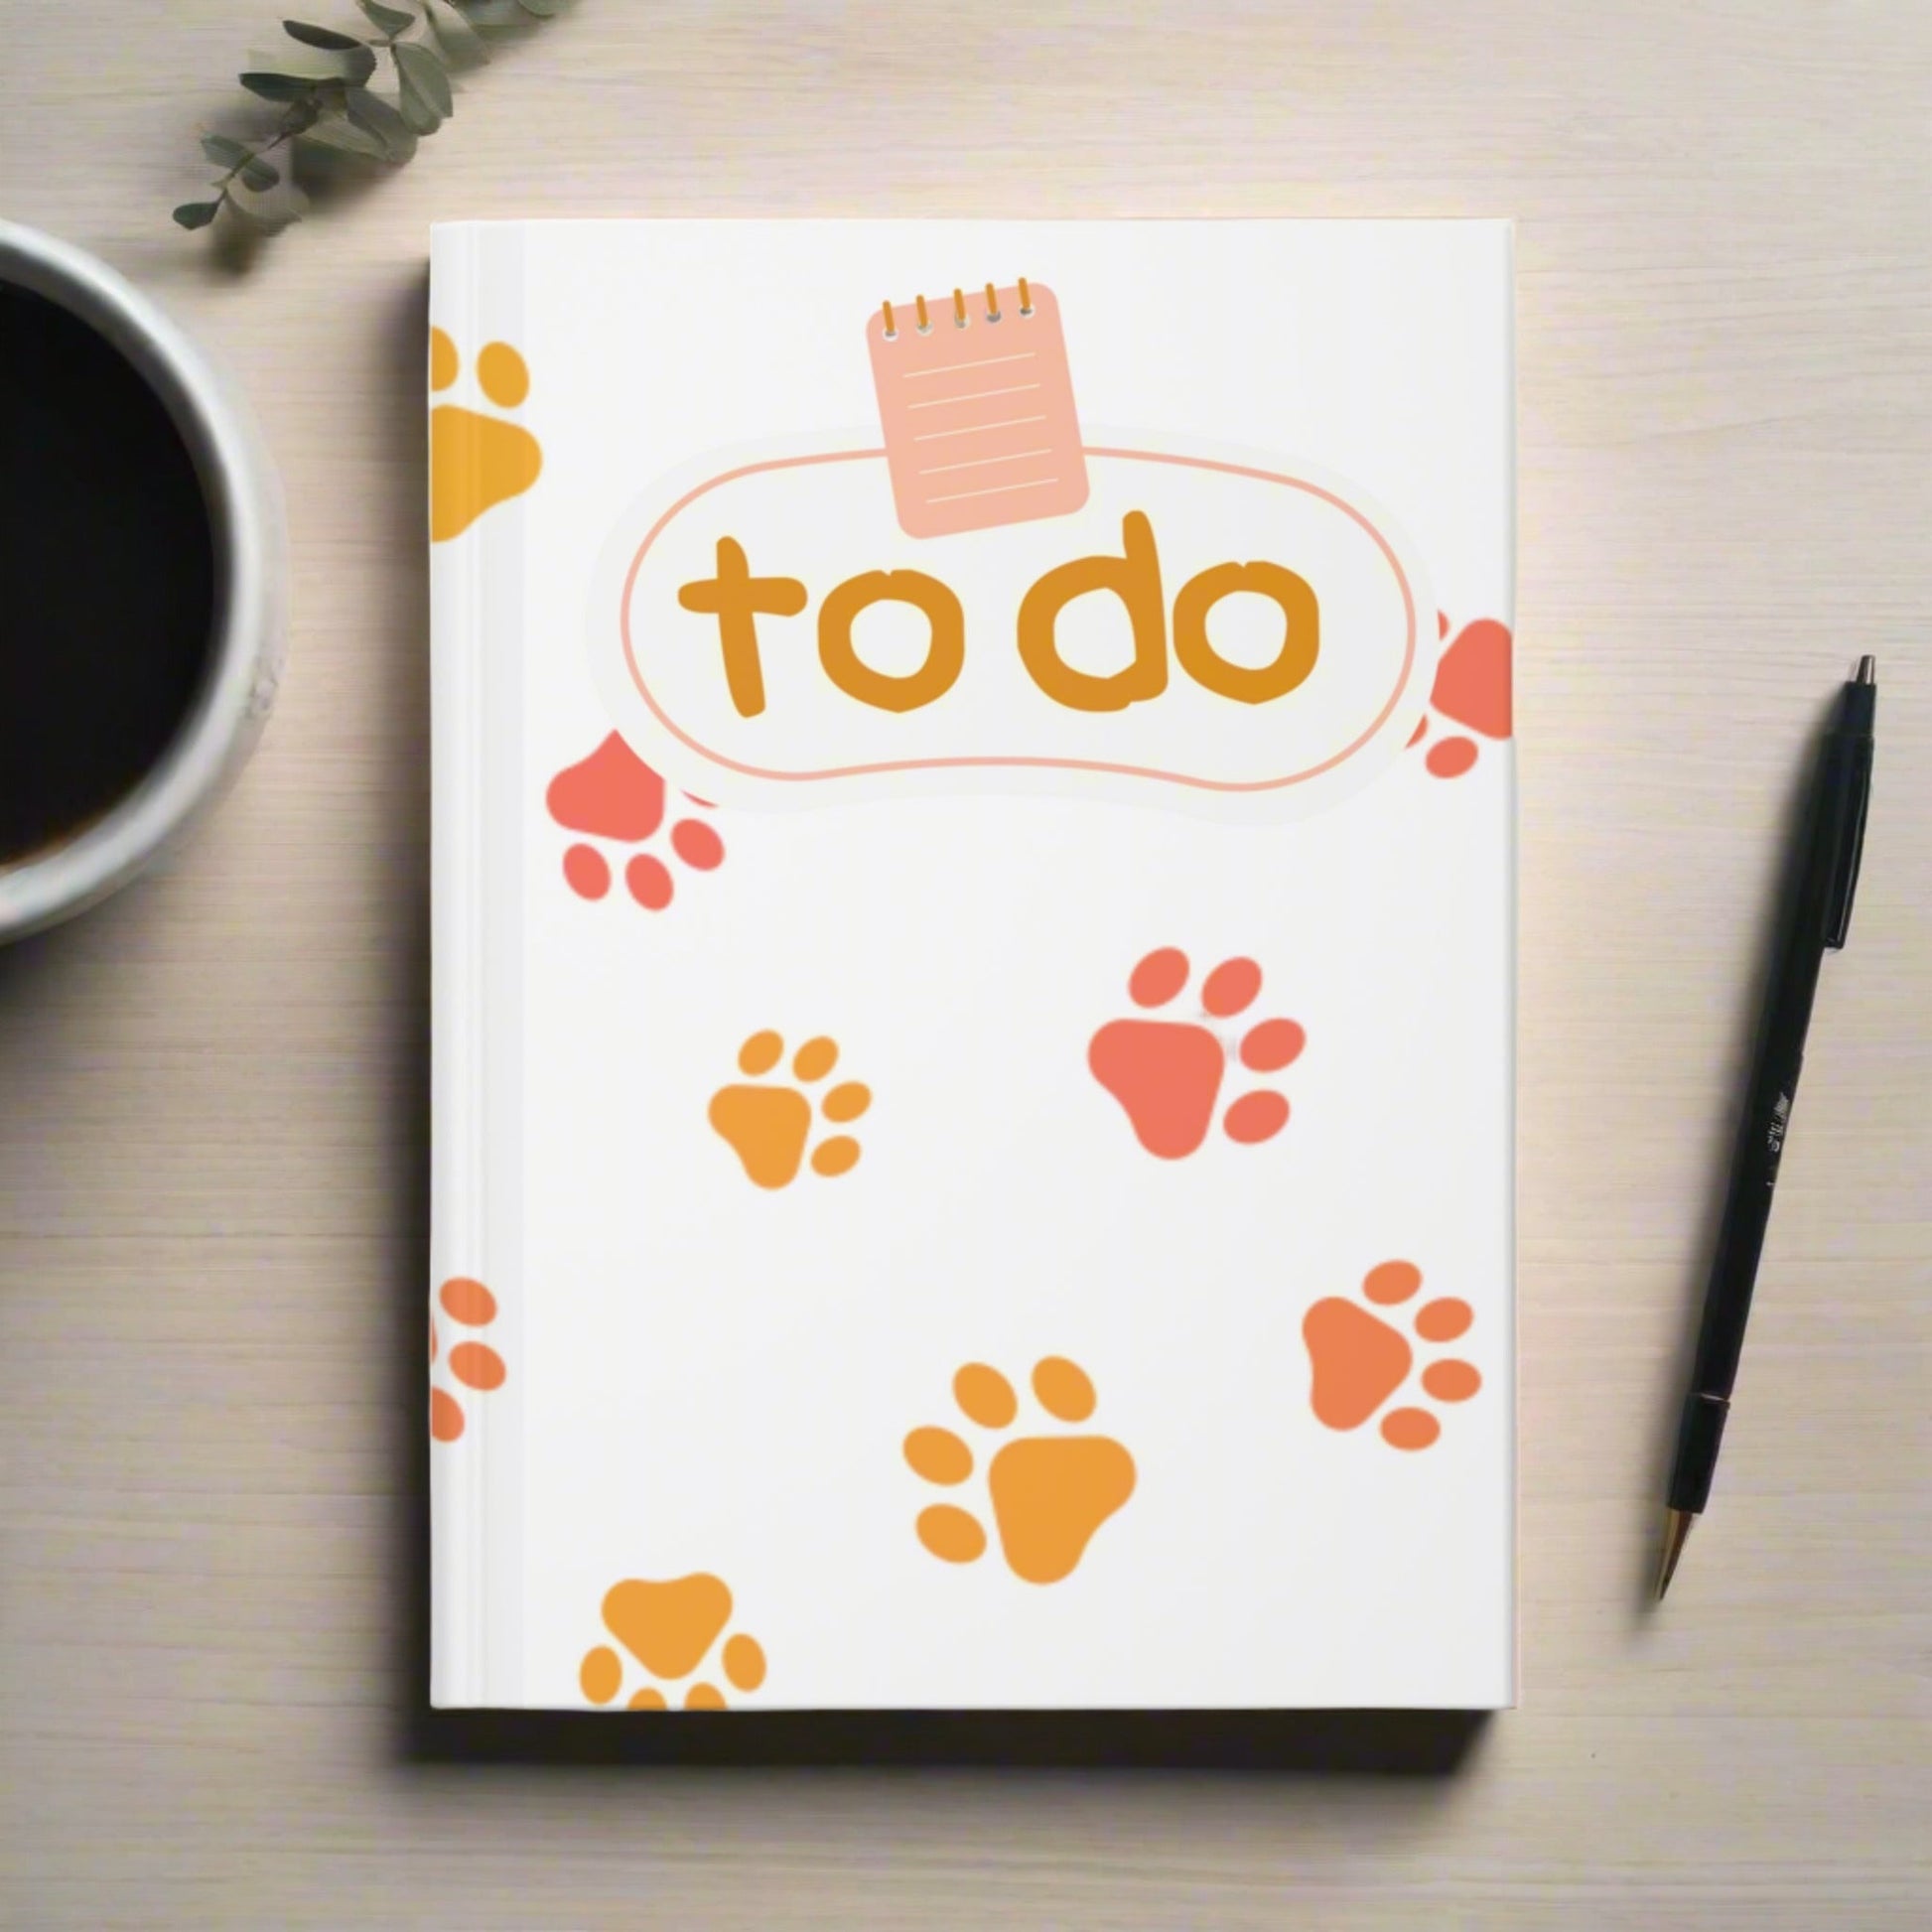 To Do Hardcover Journal Matte - Paper products - Epileptic Al’s Shop